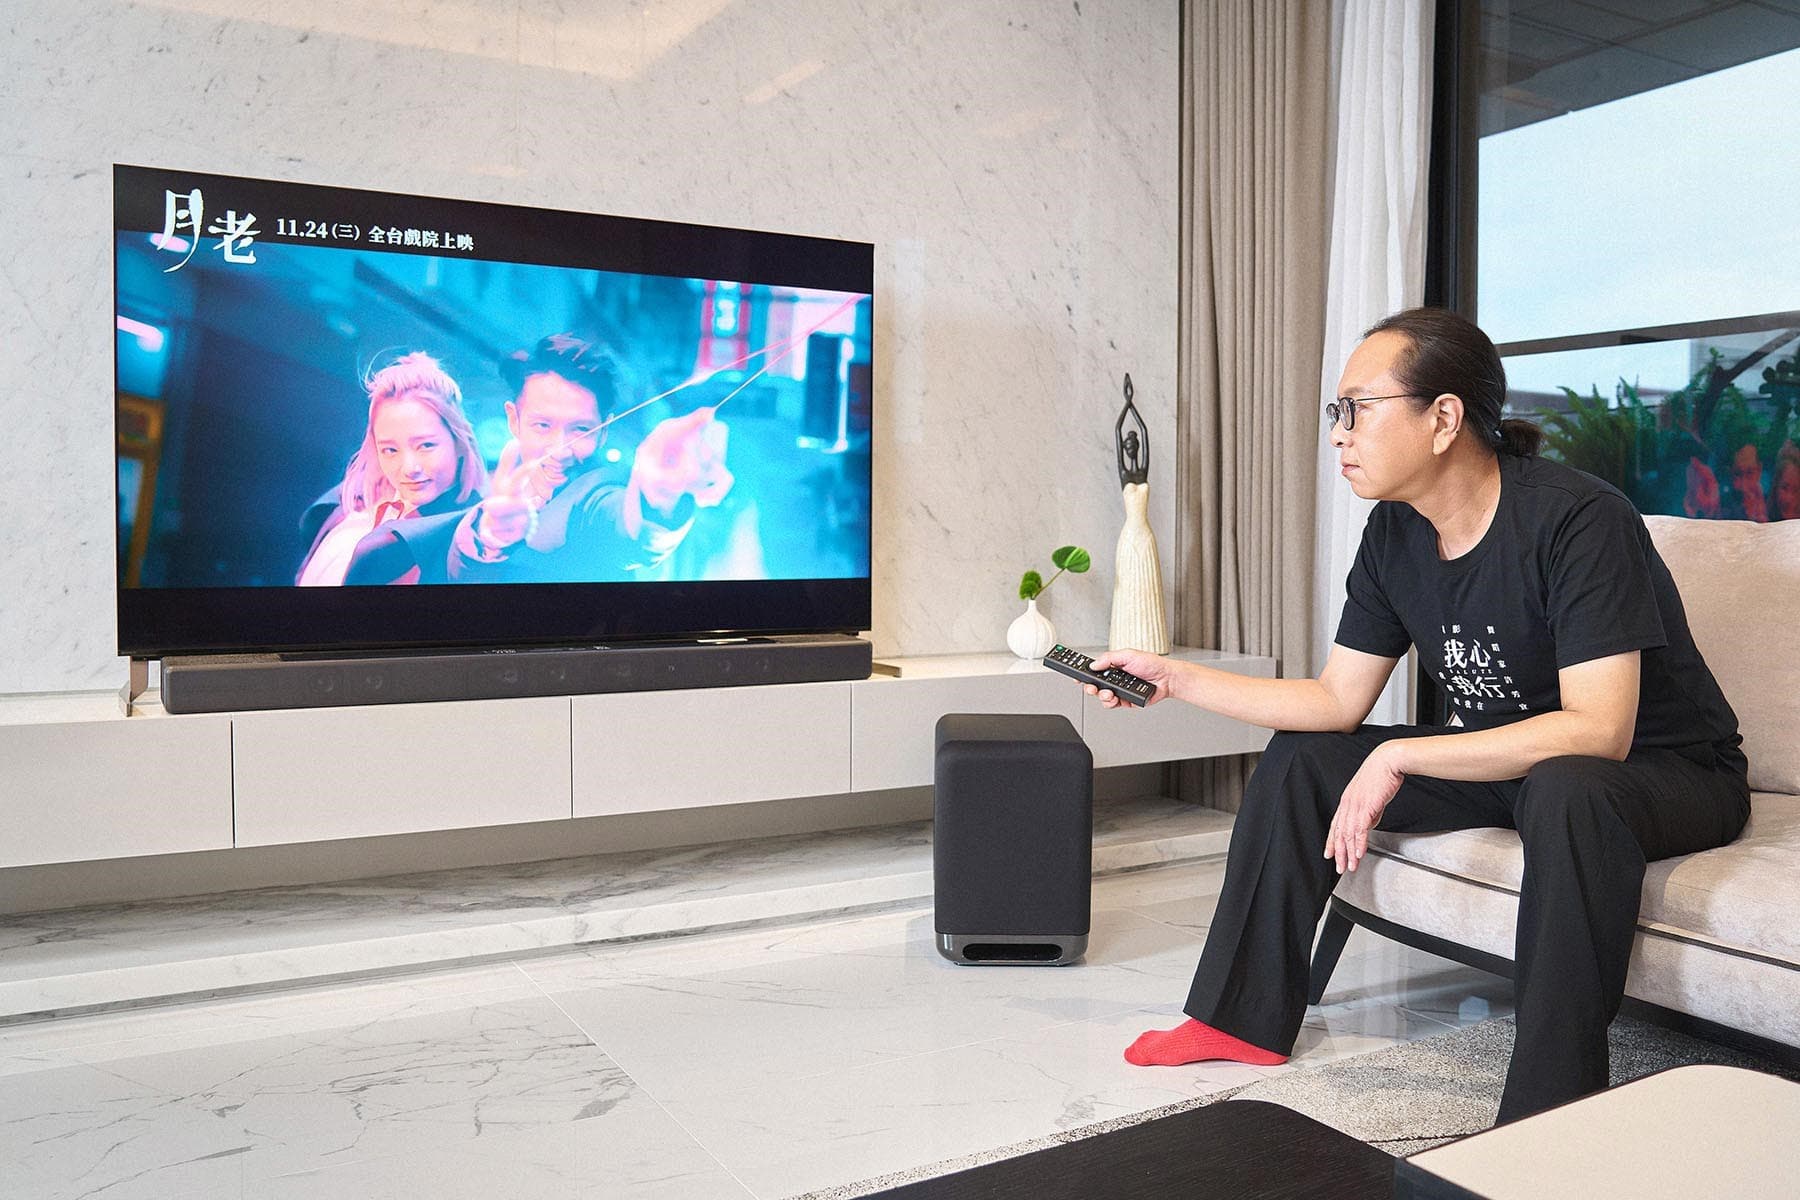 Interview with Zhu Shiyi, winner of the Golden Horse Award for Best Sound Effects, to explore how the Sony HT-A7000 Soundbar creates a more immersive entertainment experience